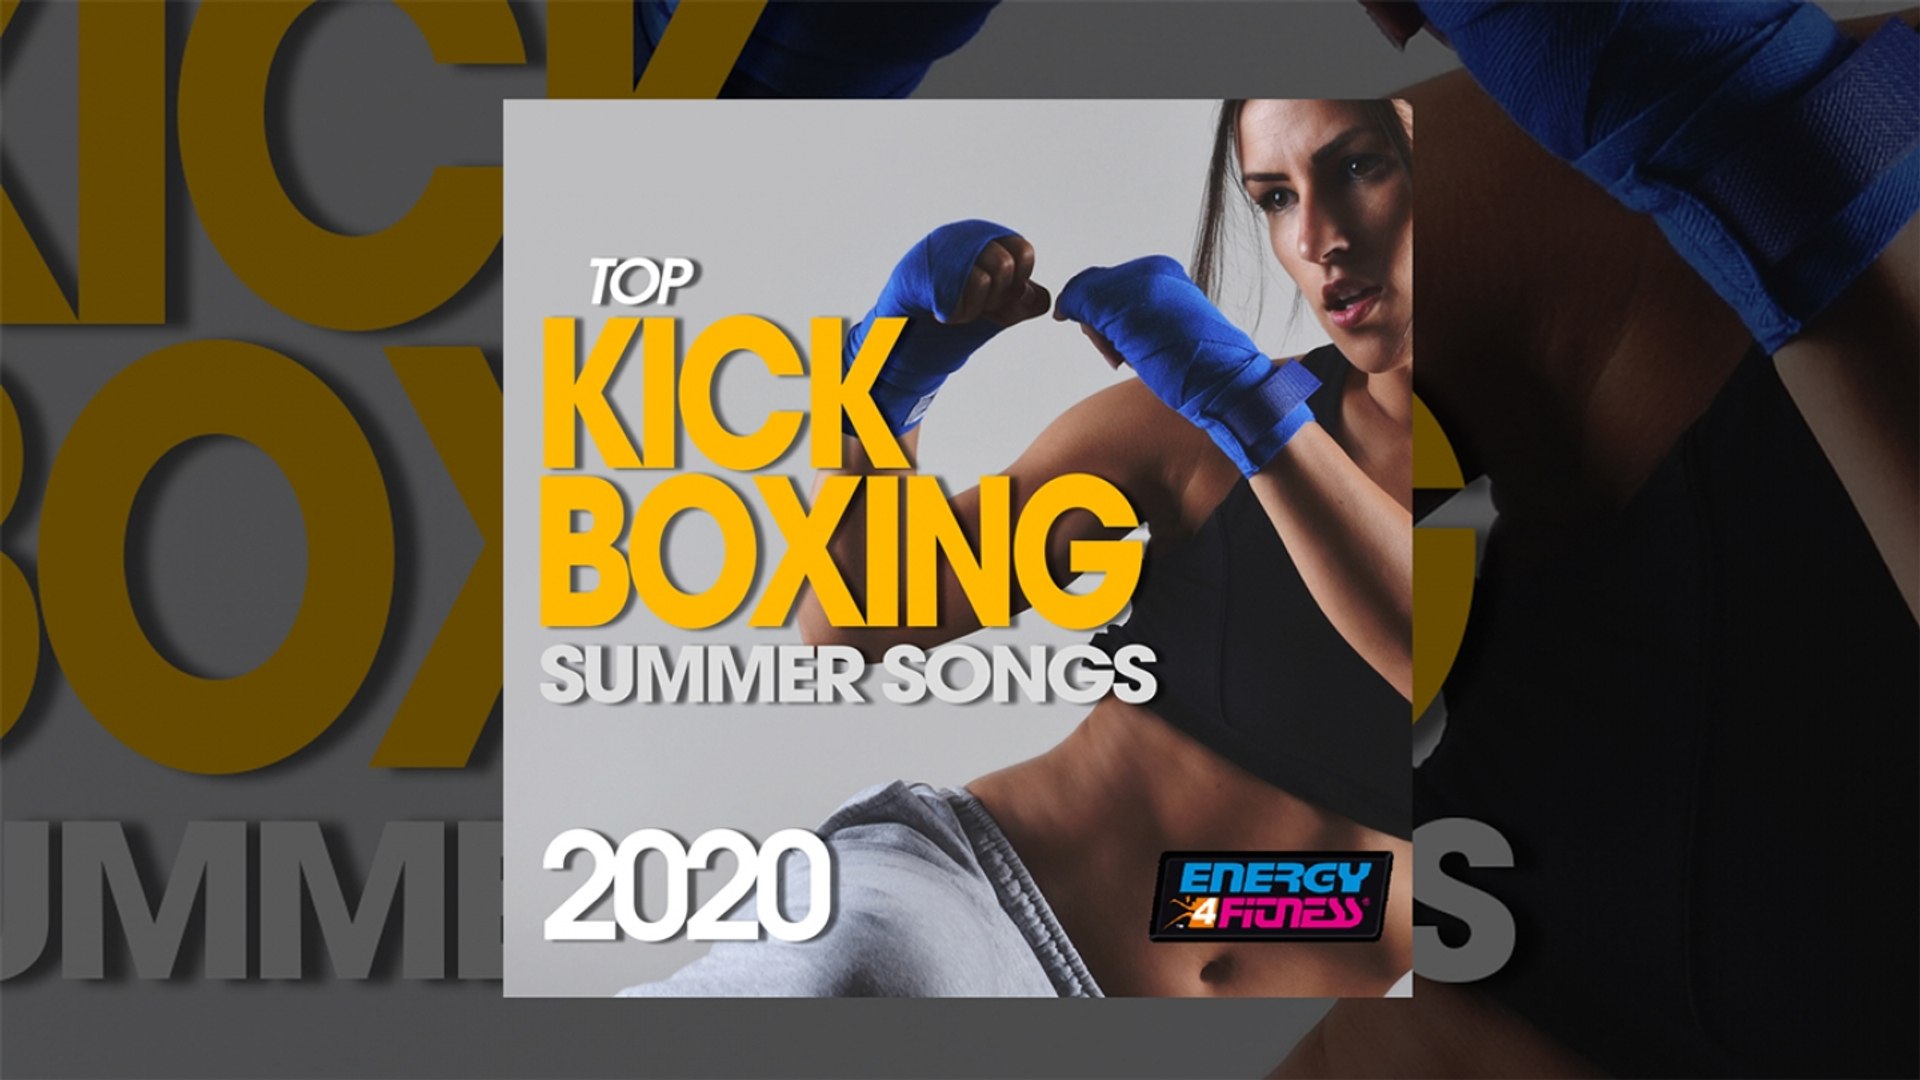 E4F - Top Kick Boxing Summer Songs 2020 - Fitness & Music 2020